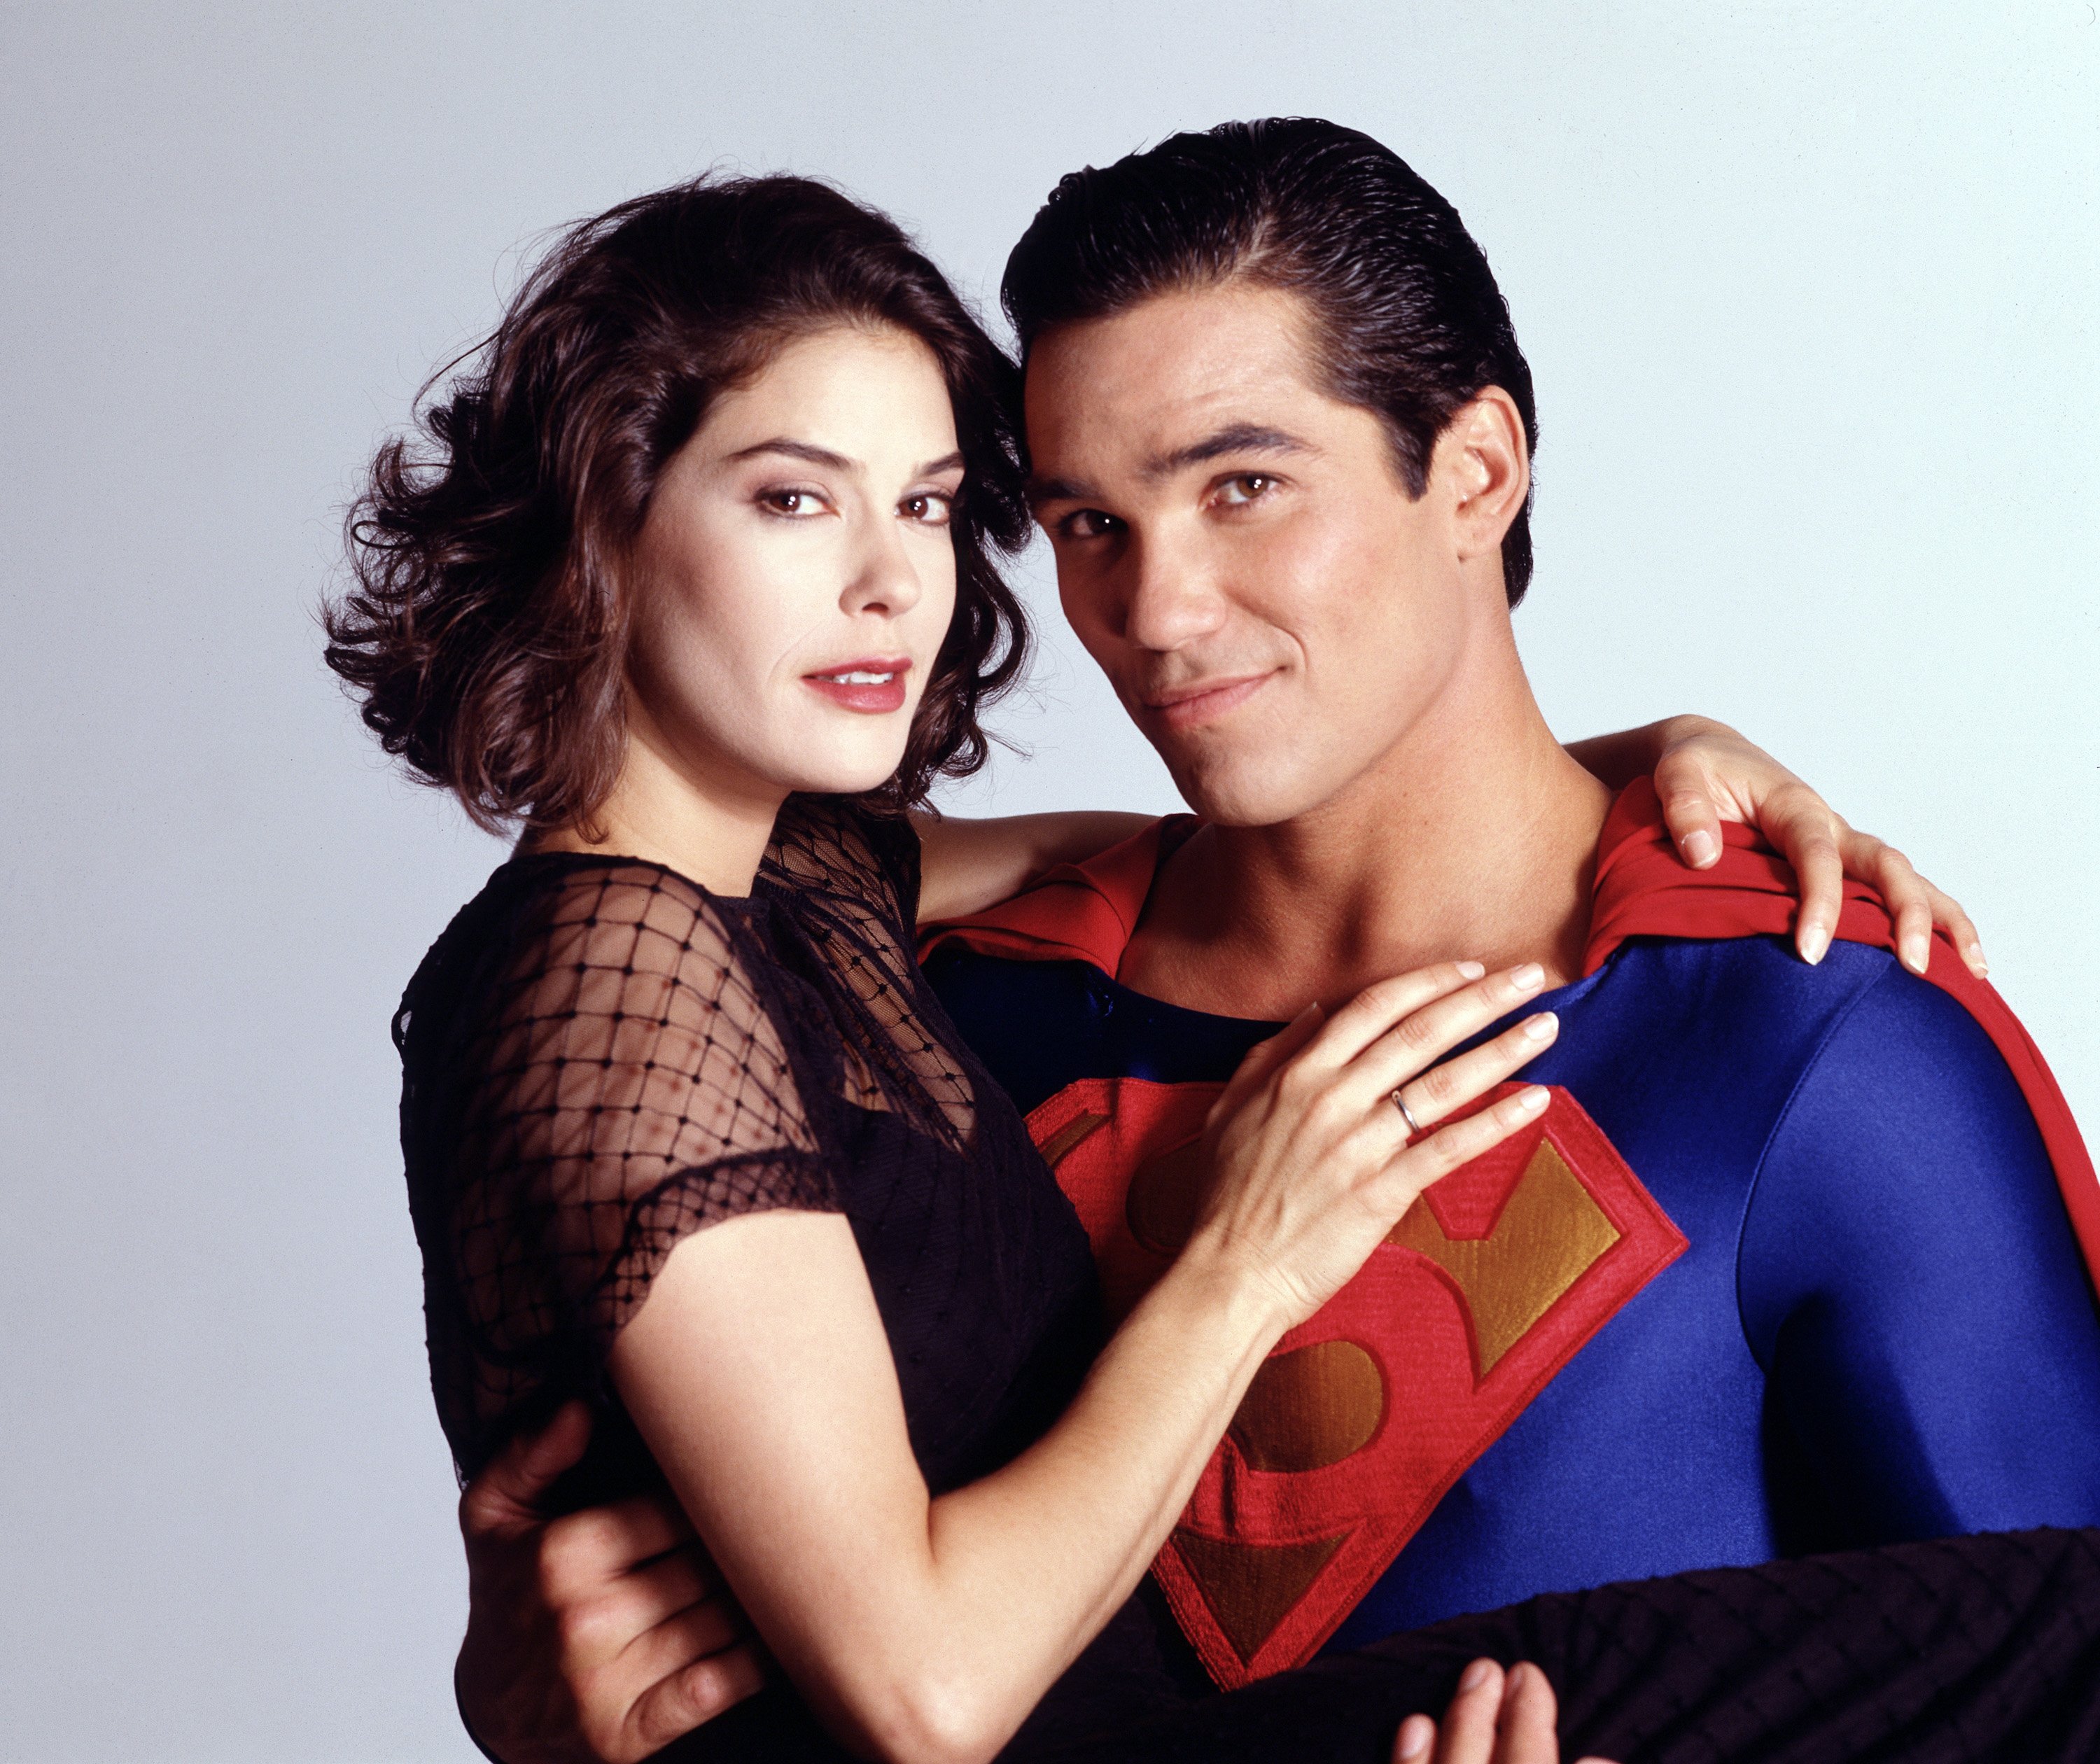 Dean Cain pictured carrying Teri Hatcher while portraying Superman. | Source: Getty Images